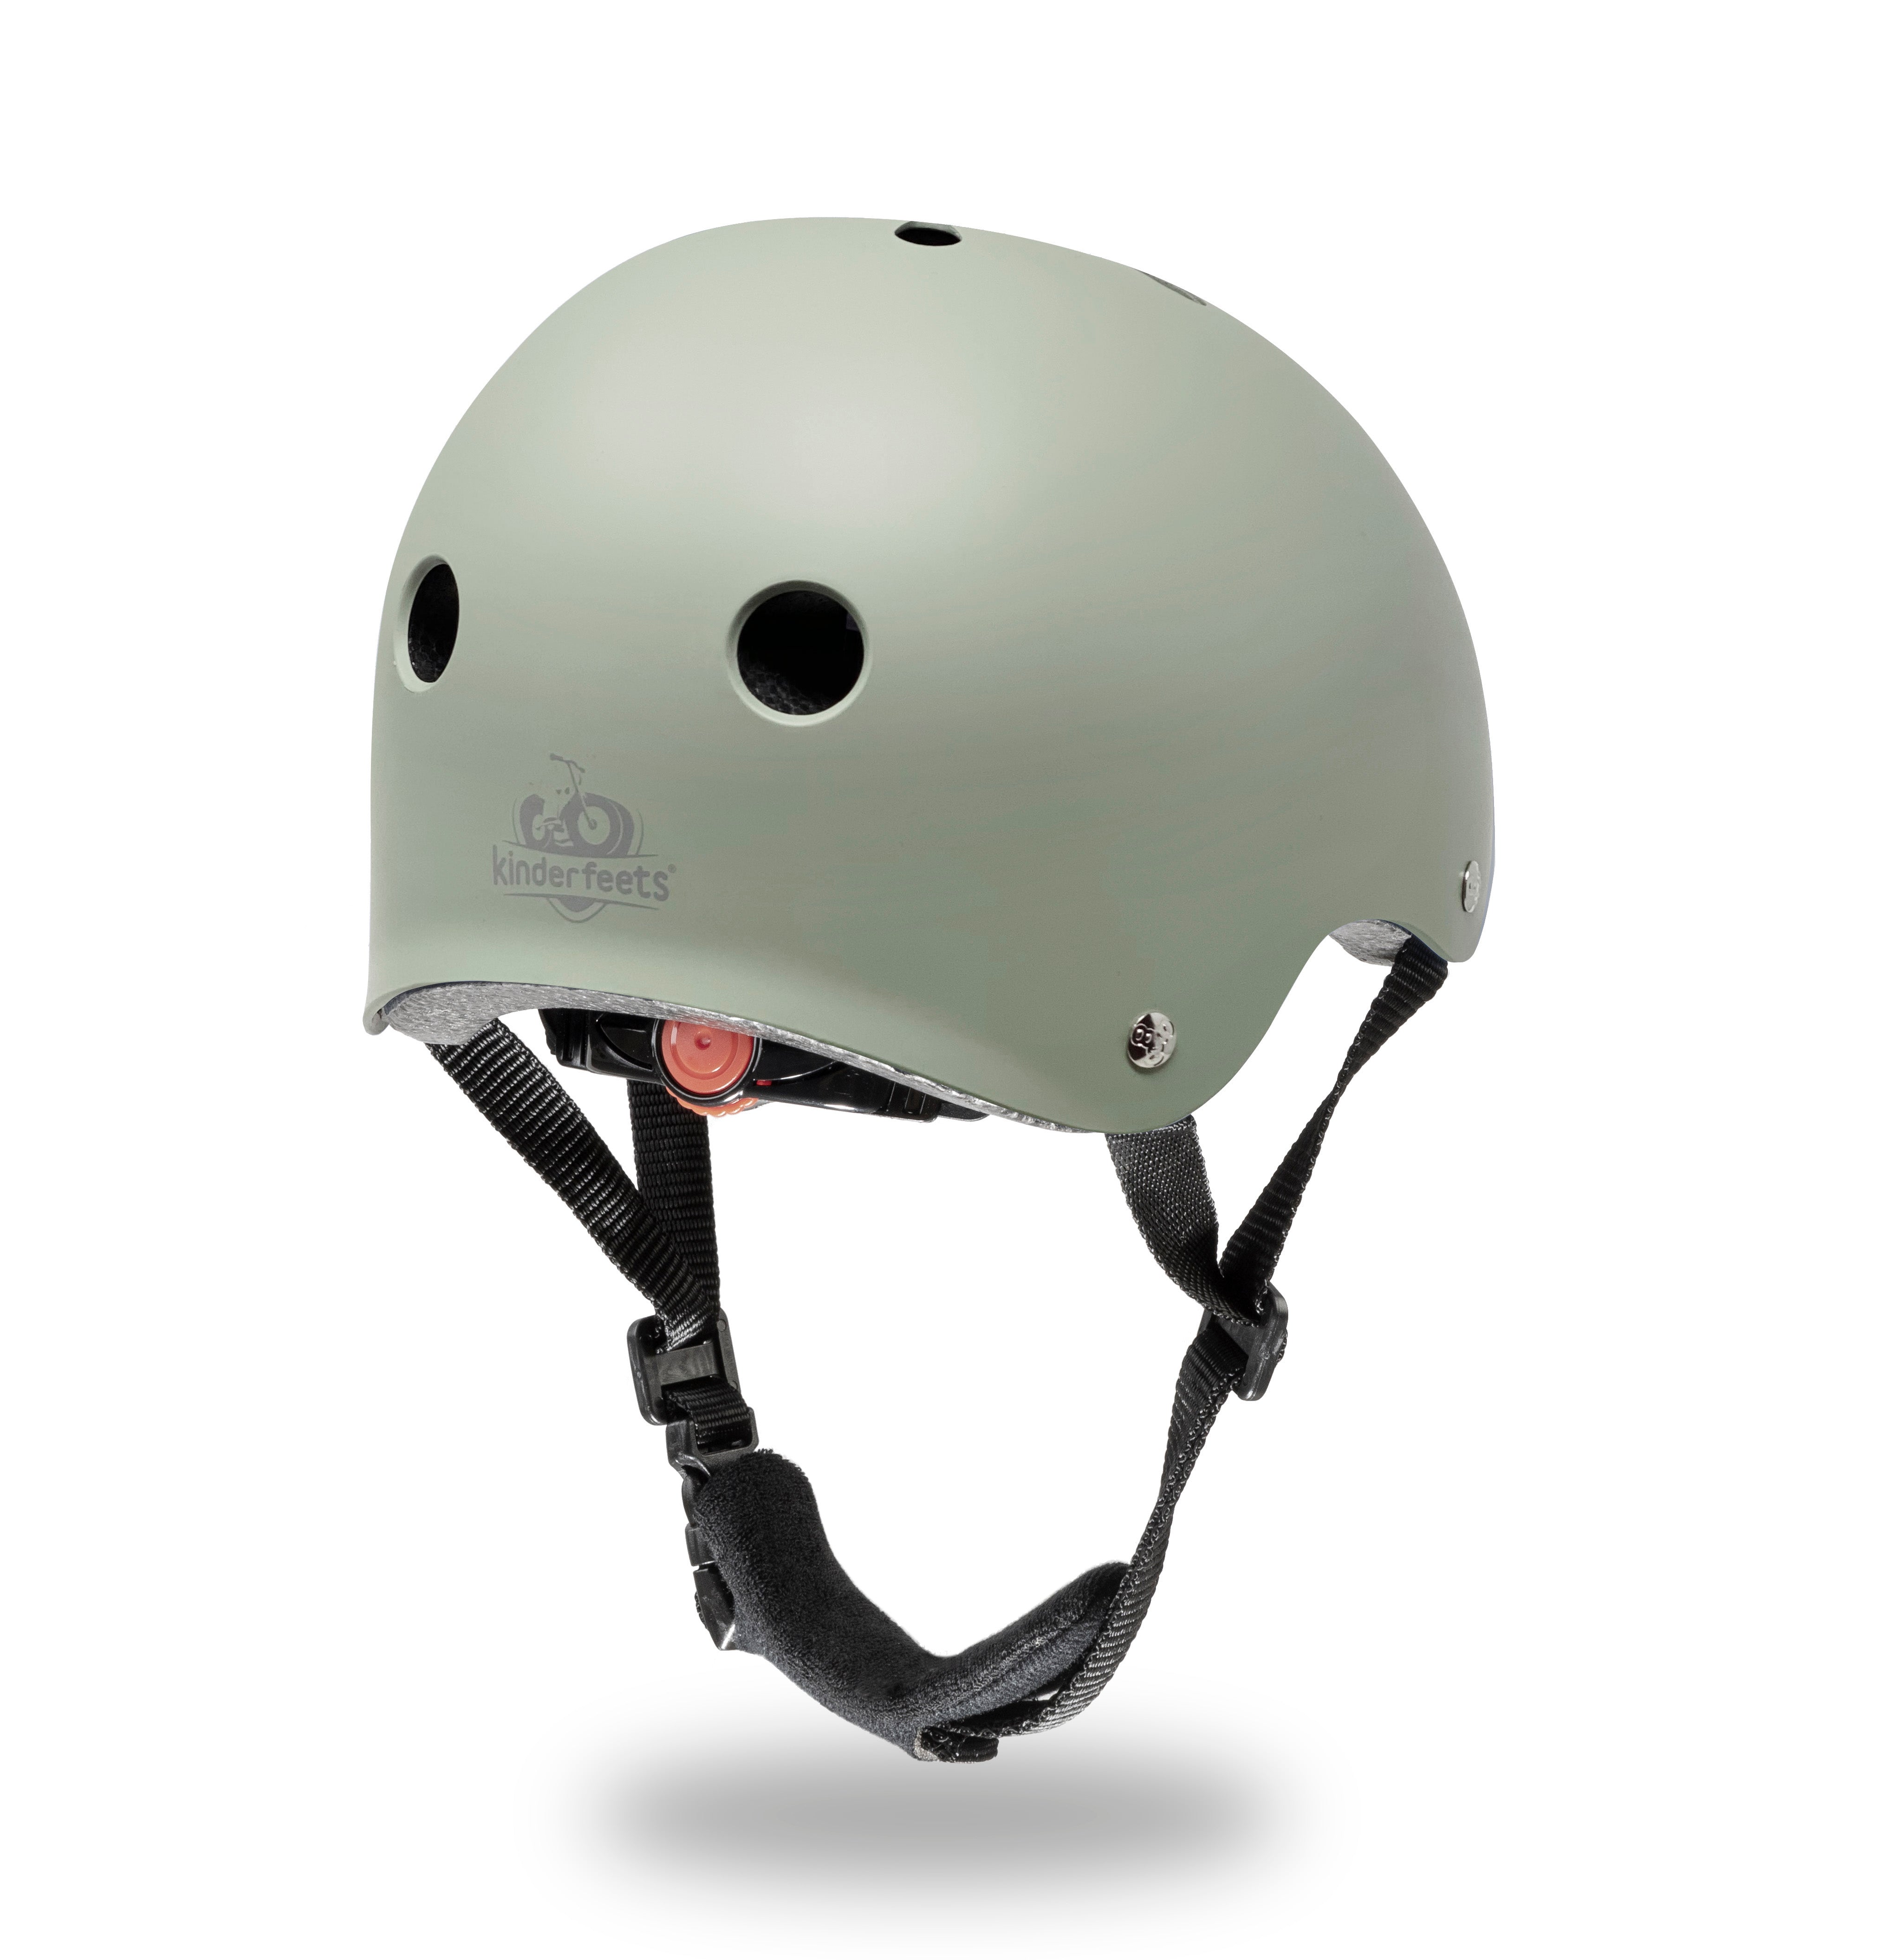 Kinderfeets Toddler Bike Safety Helmet in Matte Silver Sage. Adjustable Fit Dial System and padded chin strap provide additional comfort while an ABS outer shell and EPS liner ensure child safety.